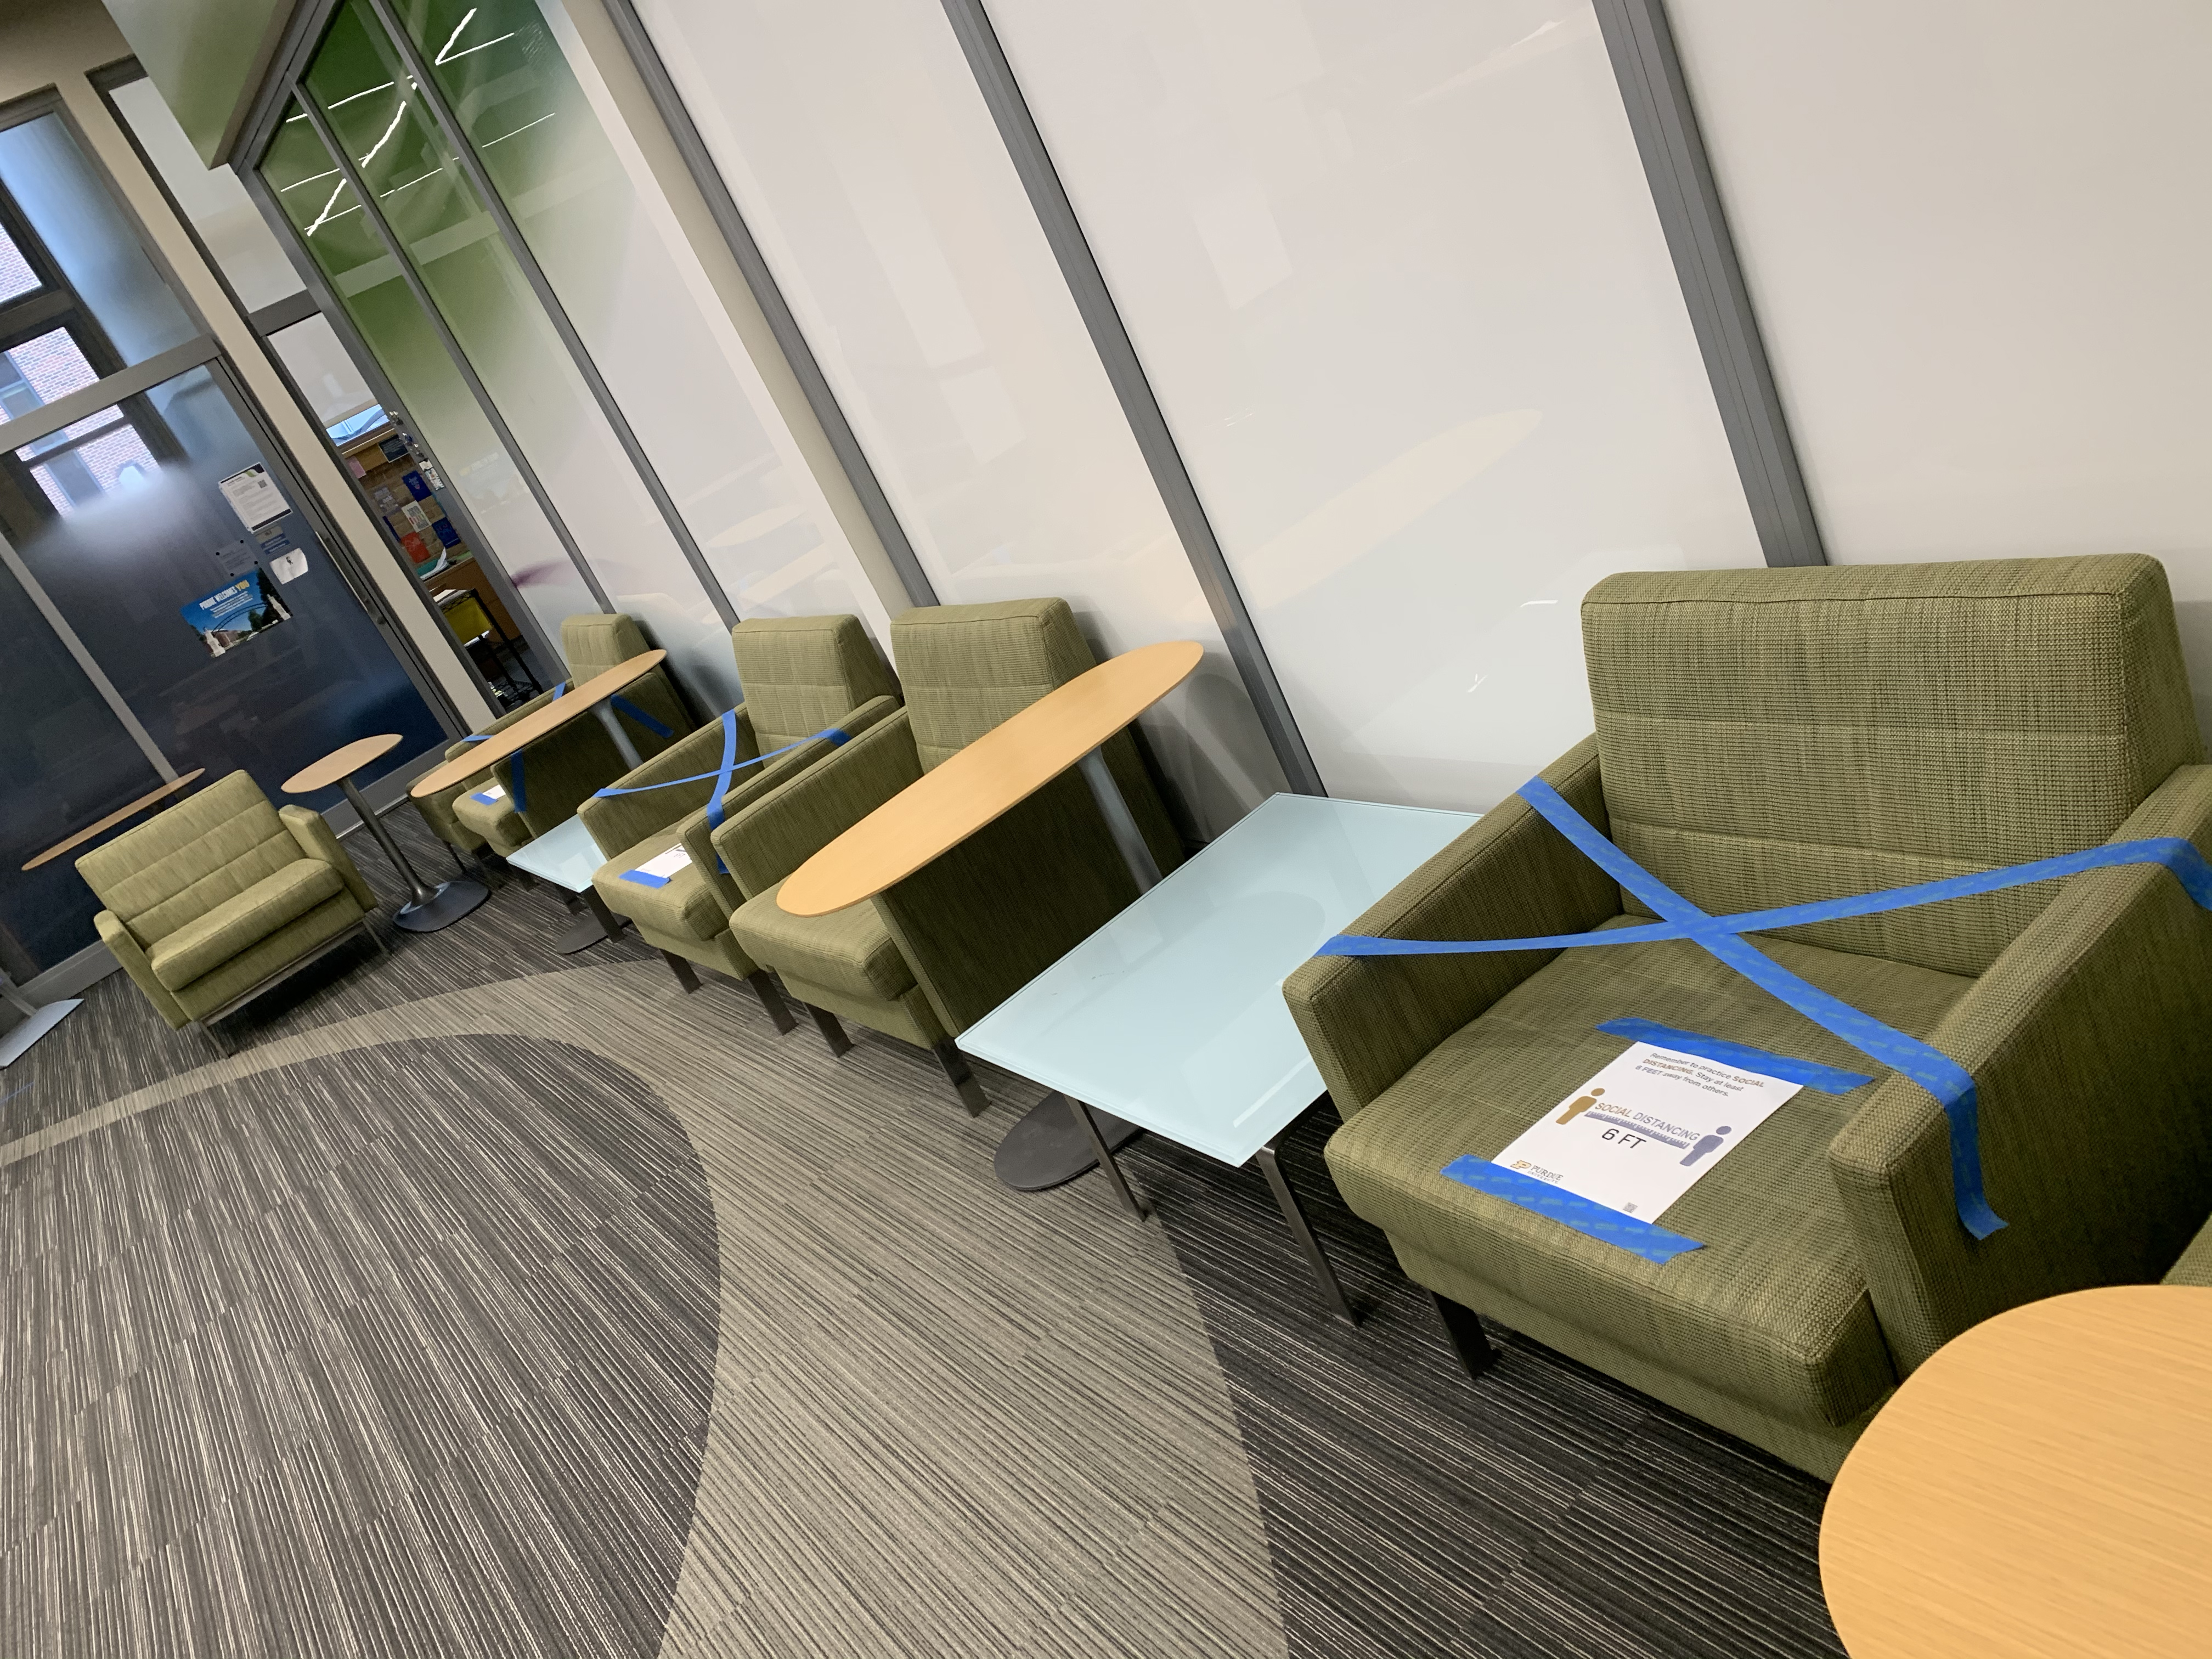 Grssom Hall Lobby chairs marked for social distancing